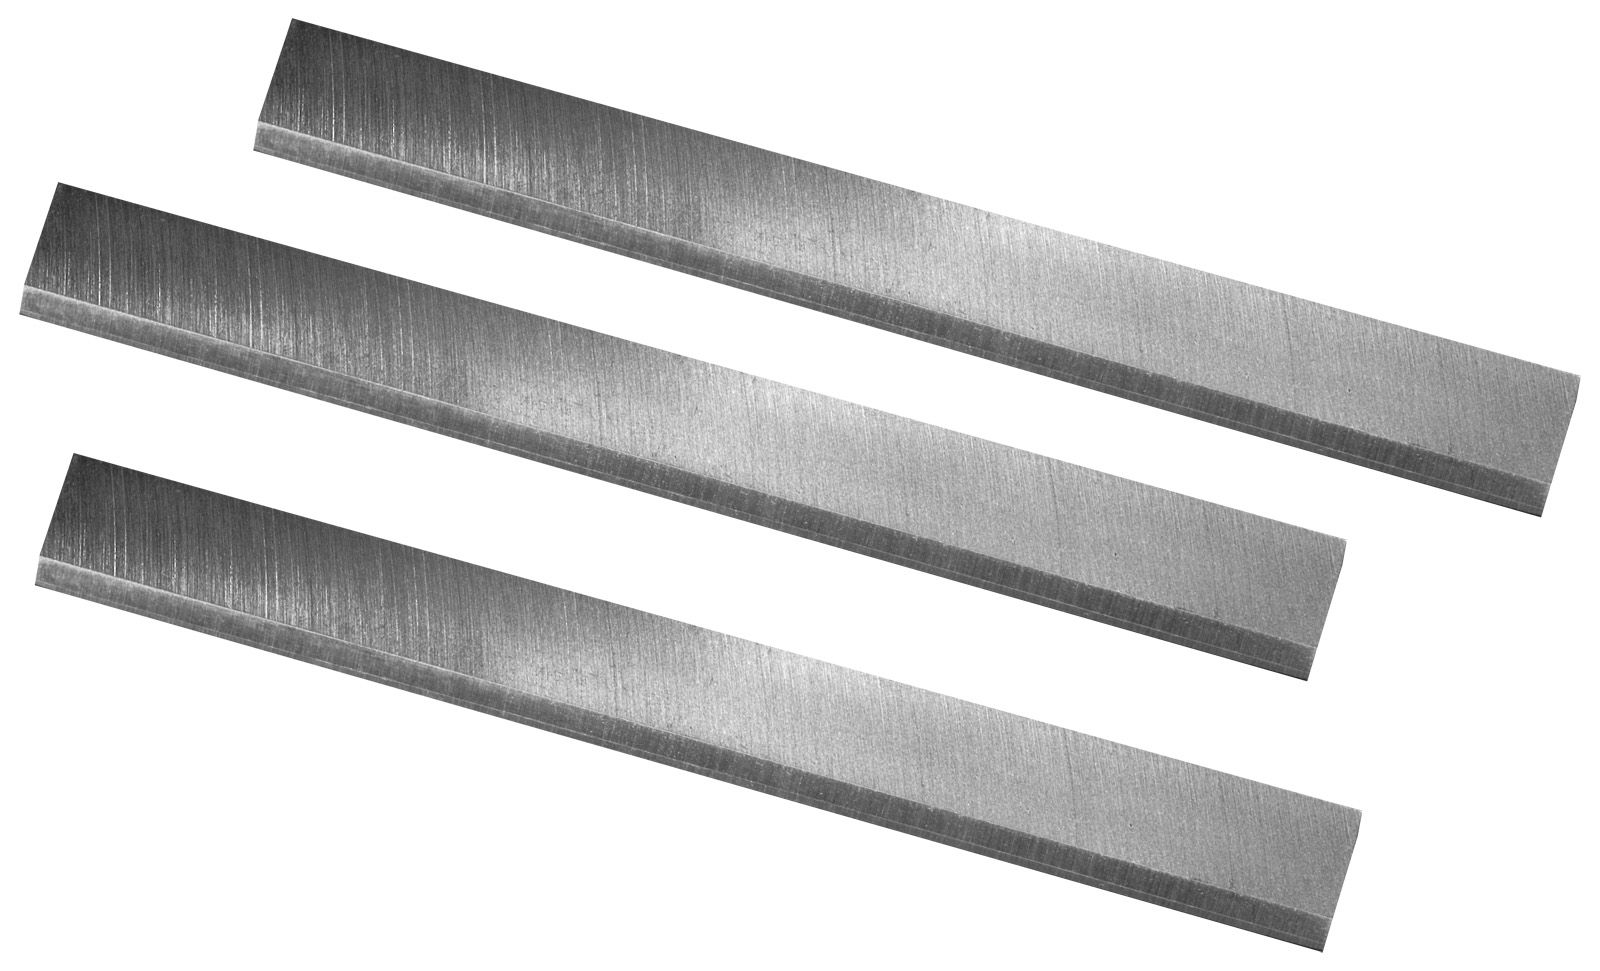 Powertec 148022 6-Inch Jointer Knives for Craftsman 21705, HSS, Set of 3